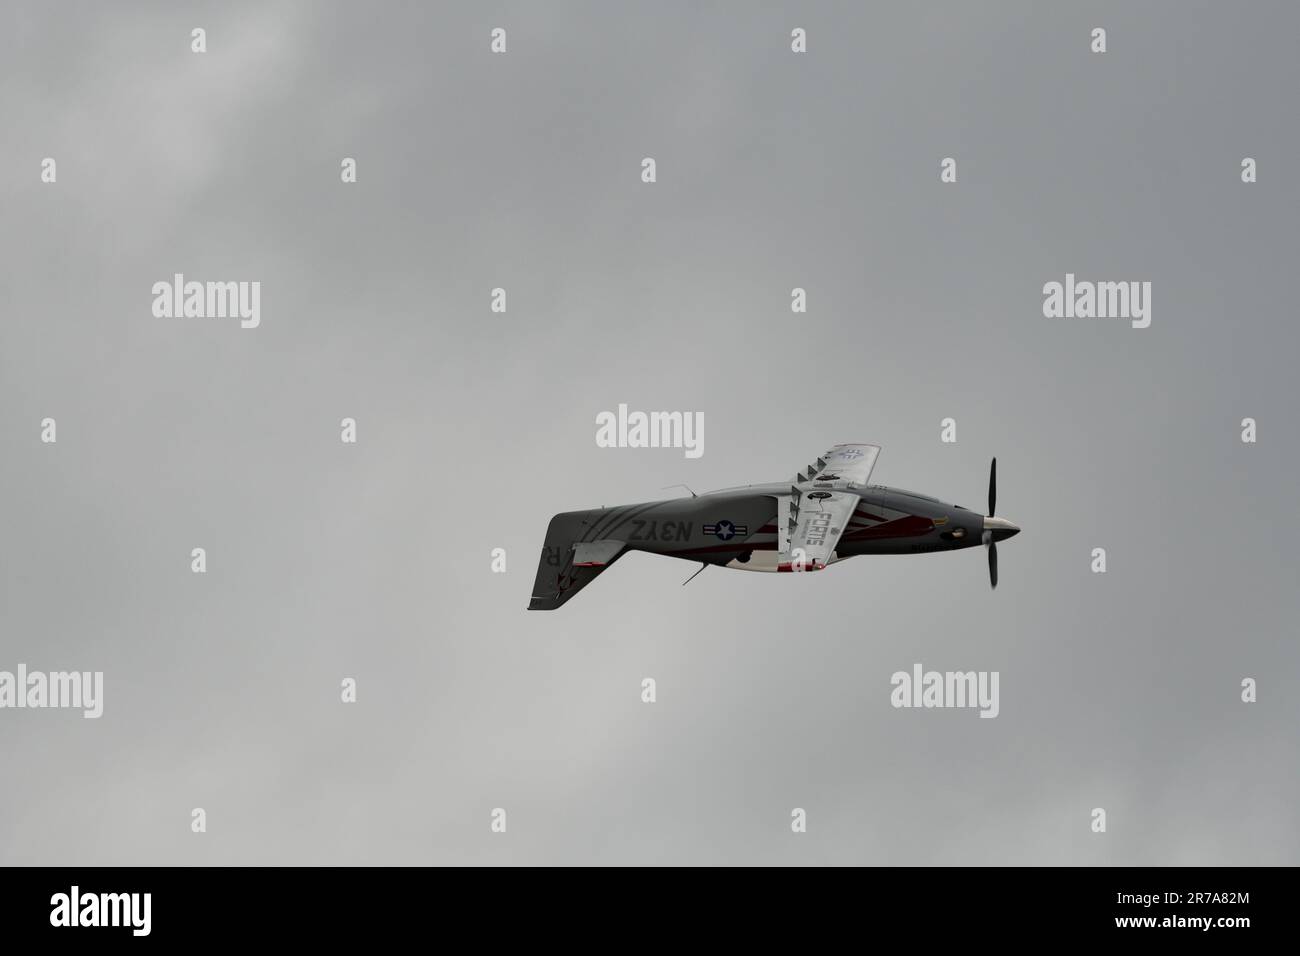 Rhine Valley, Saint Gallen, Switzerland, May 20, 2023 N-3YZ Amateur turbine legend propeller airplane performance during an air show seen from the top Stock Photo